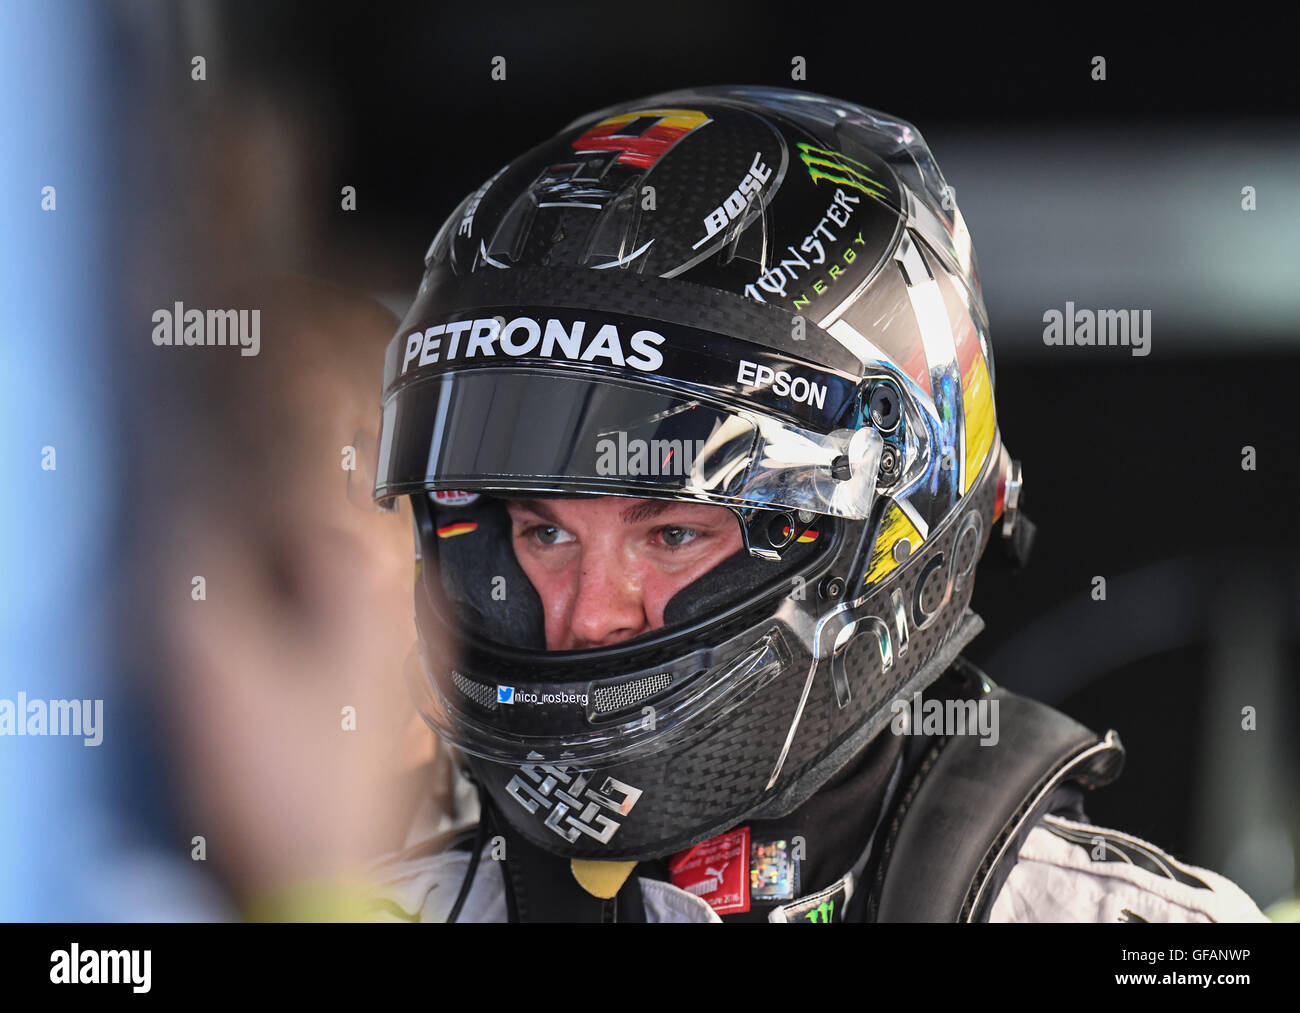 Hockenheim, Germany. 30th July, 2016. German Formula 1 racer Nico Rosberg stands in the box during the 3rd open training on the Hockenheimring in Hockenheim, Germany, 30 July 2016. The German Grand Prix takes place on 31 July 2016. Photo: WOLFRAM KASTL/dpa/Alamy Live News Stock Photo